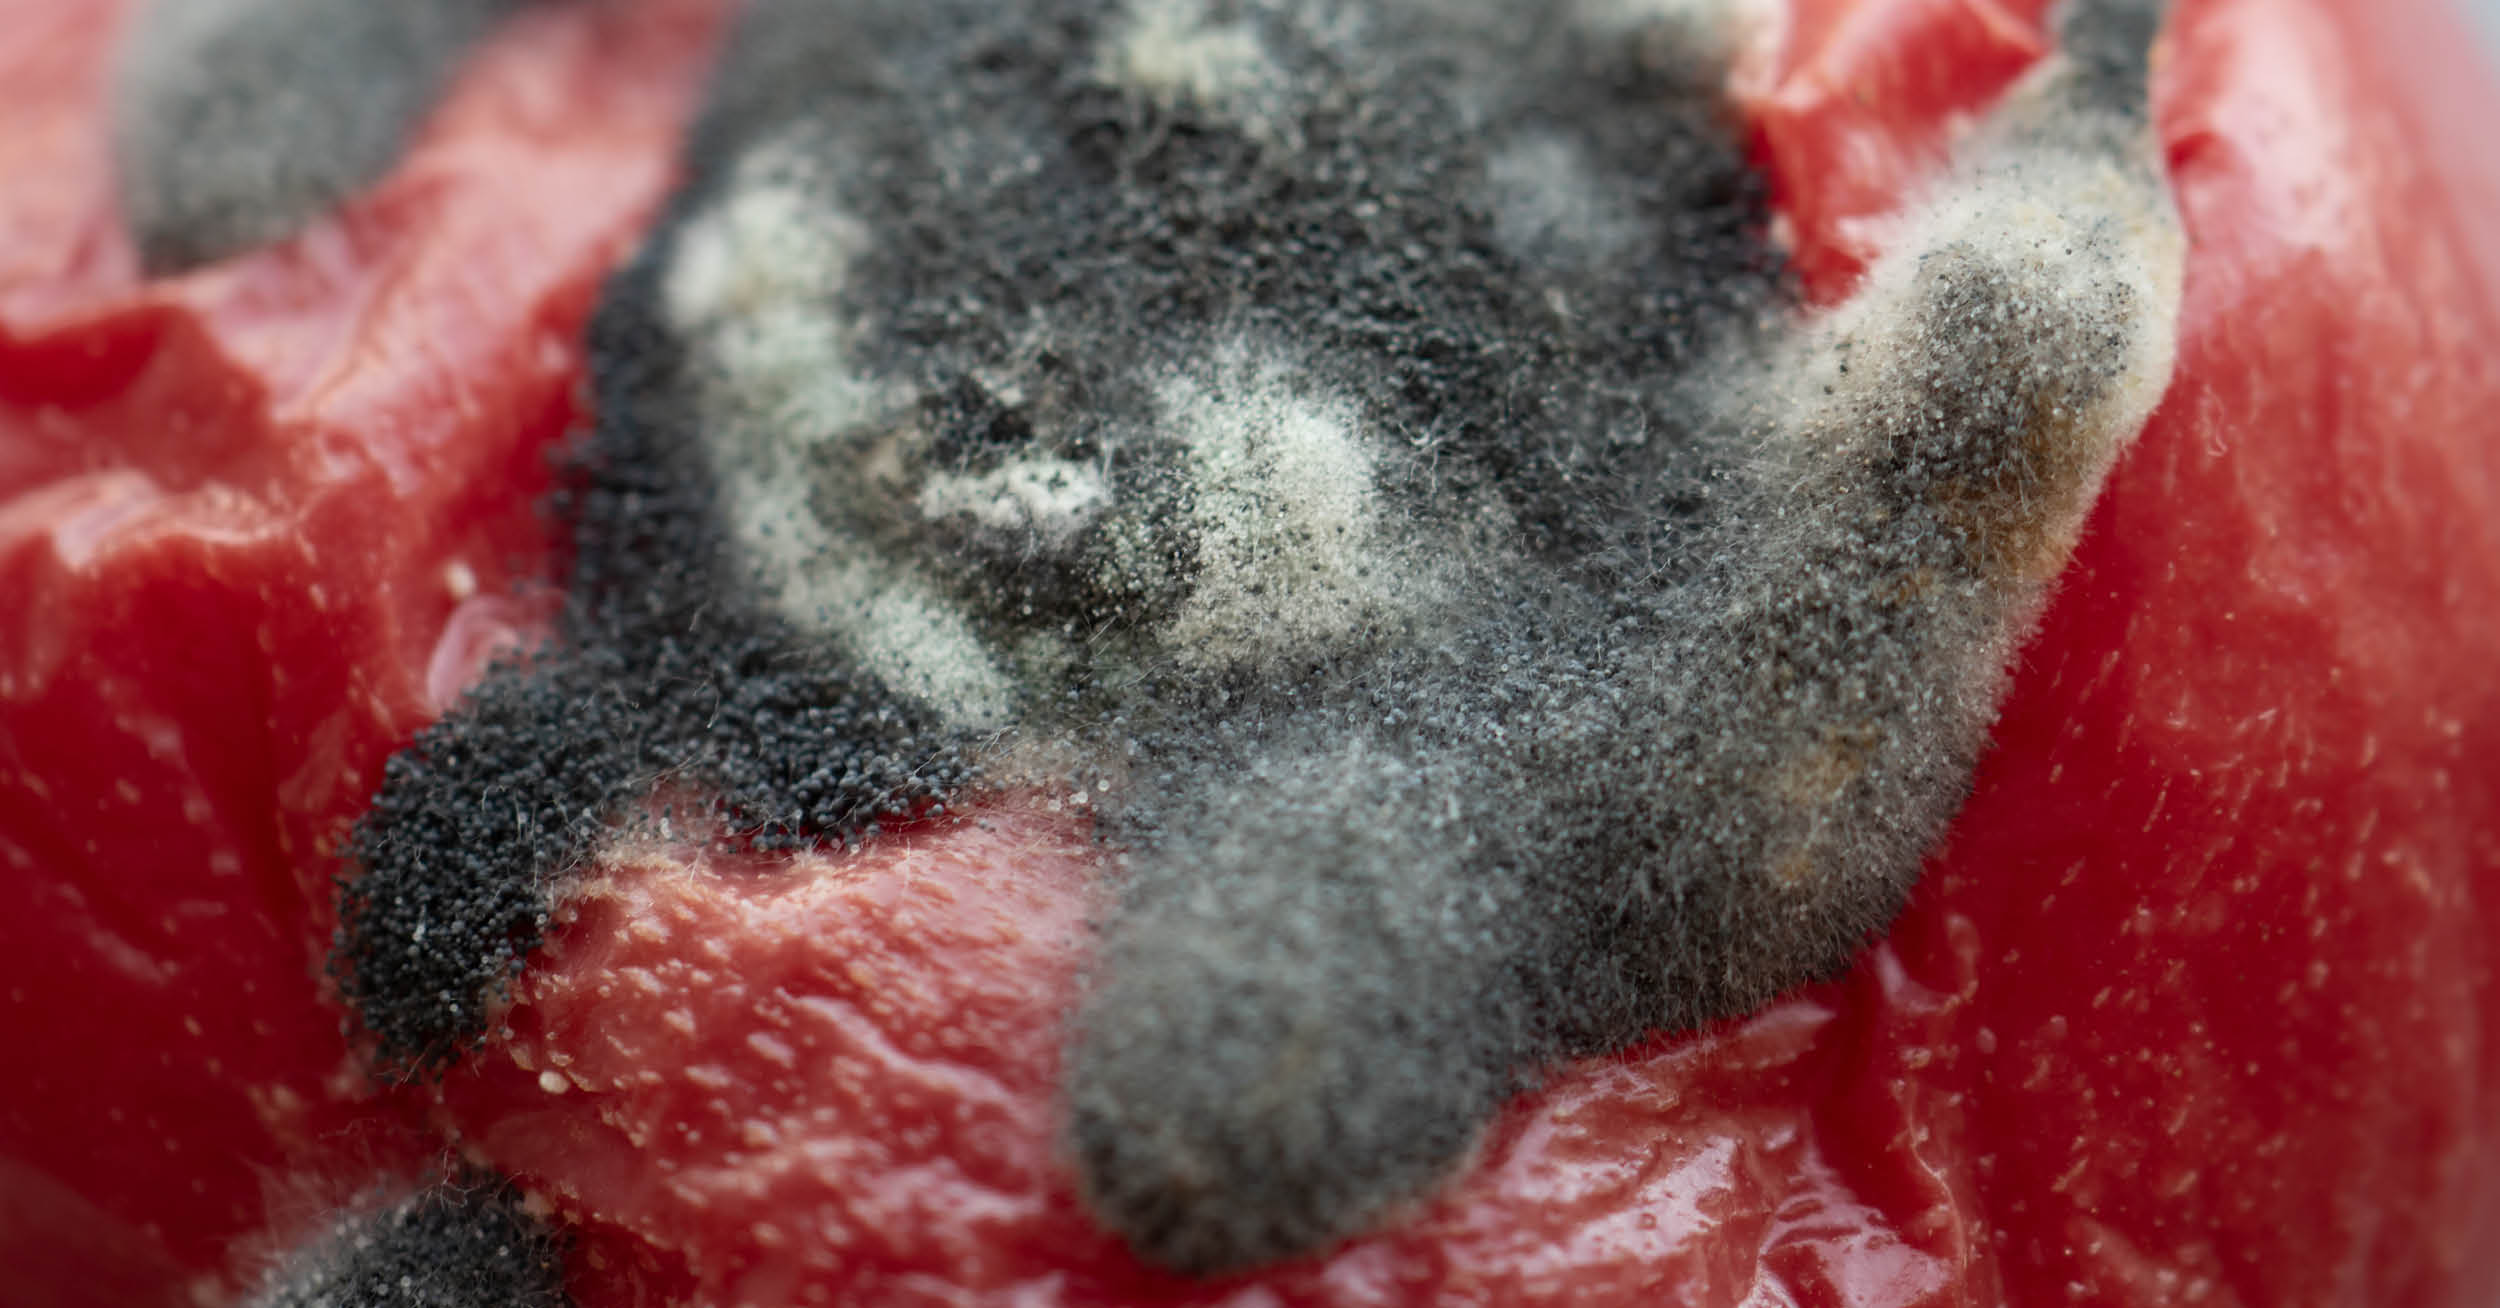 Blak mold is an indication that the decomposition is not going as it should (2)